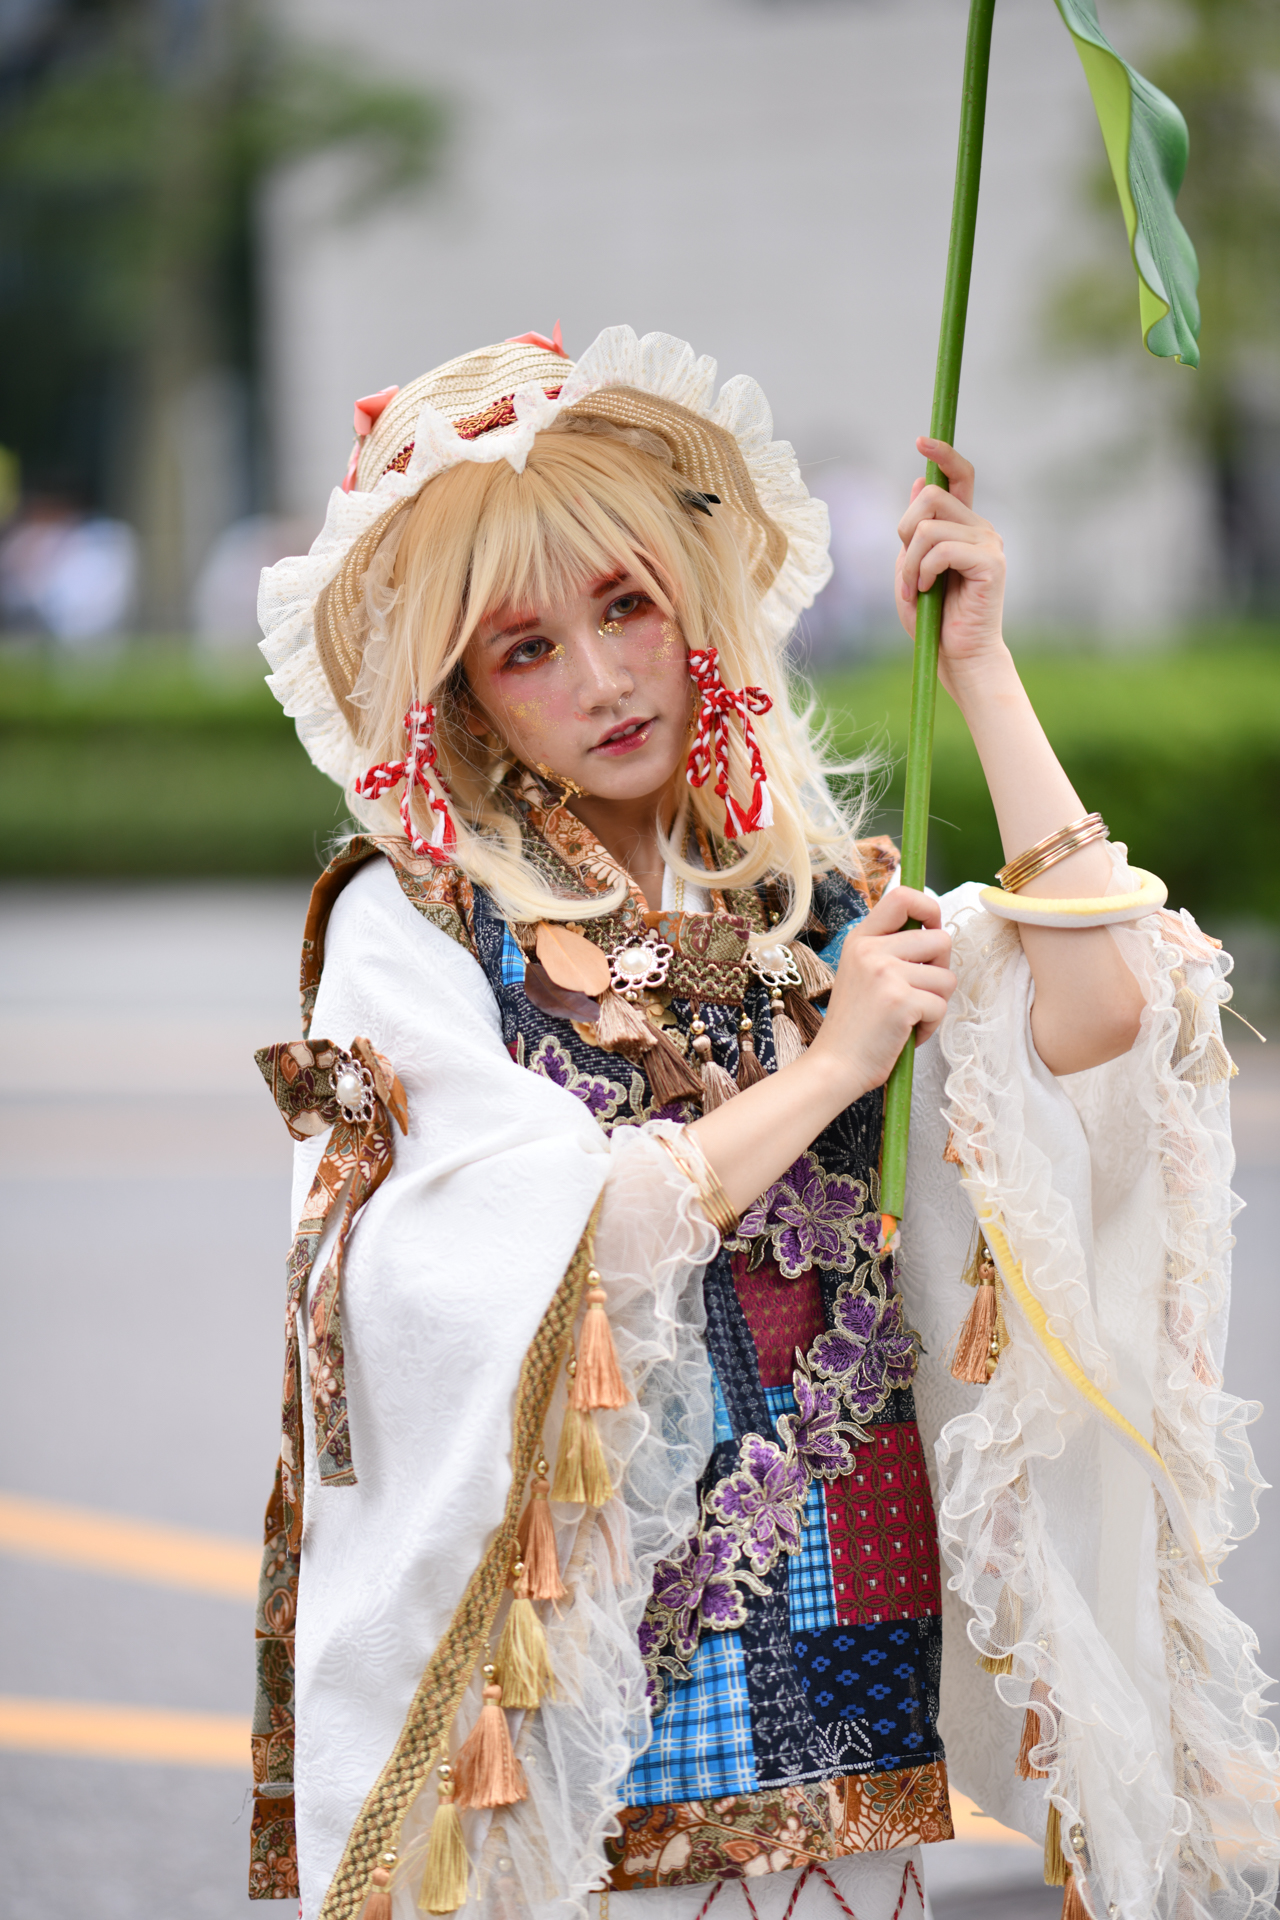 AF-S NIKKOR 105mm f1.4E ED 作例 コスプレ 19th FIREFLY ACG FESTIVAL 広州蛍火虫動漫遊戯嘉年華